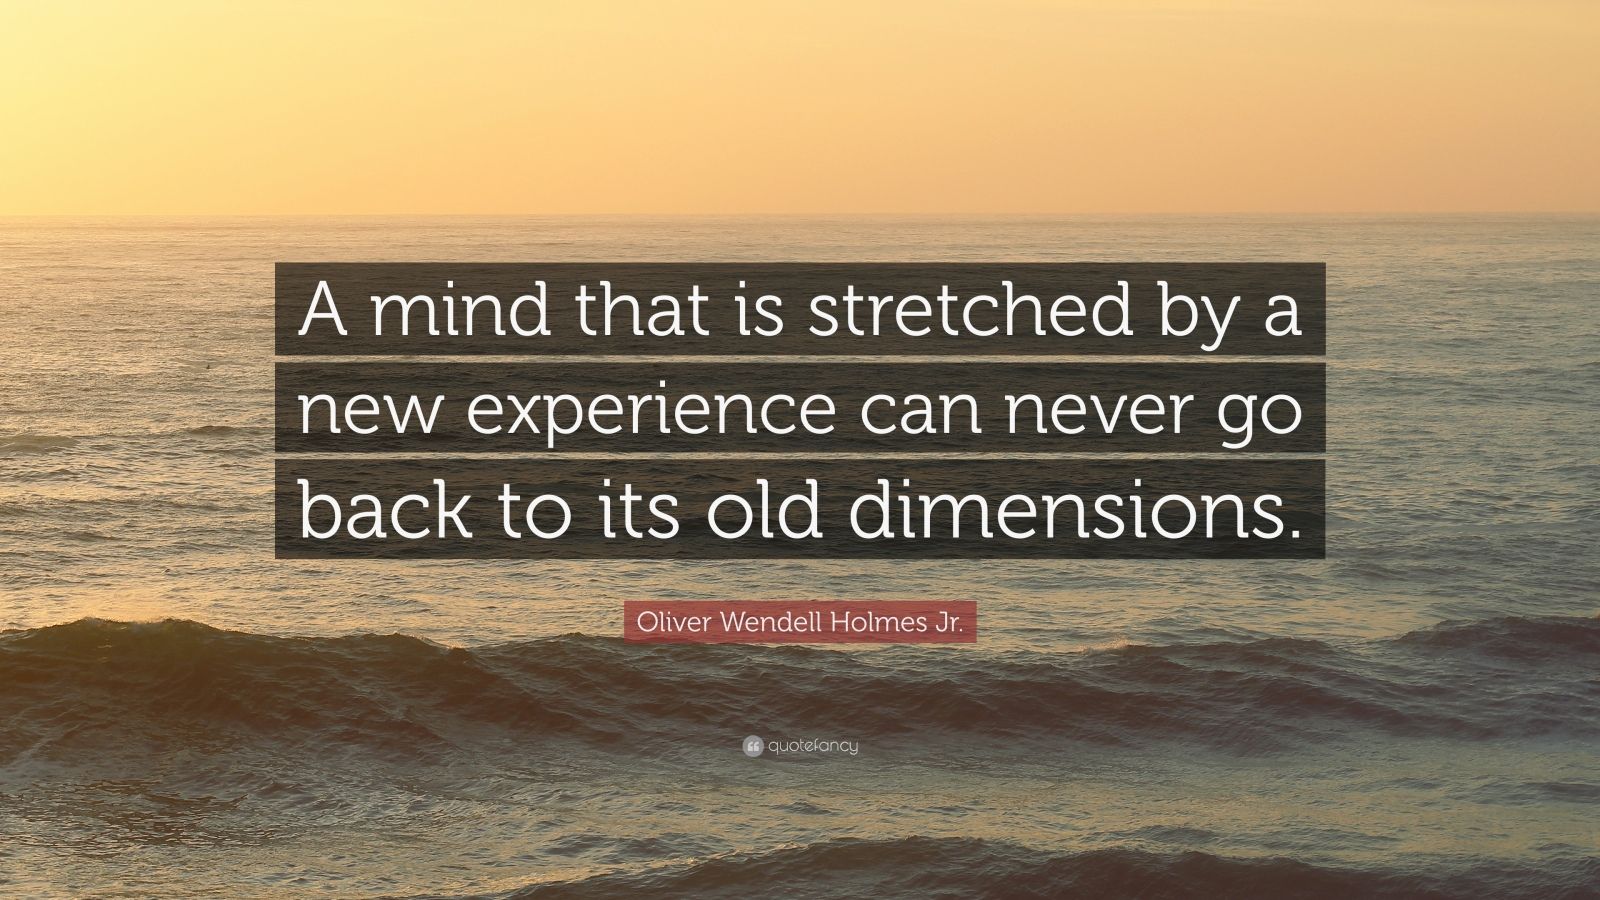 Oliver Wendell Holmes Jr. Quote: “A mind that is stretched by a new